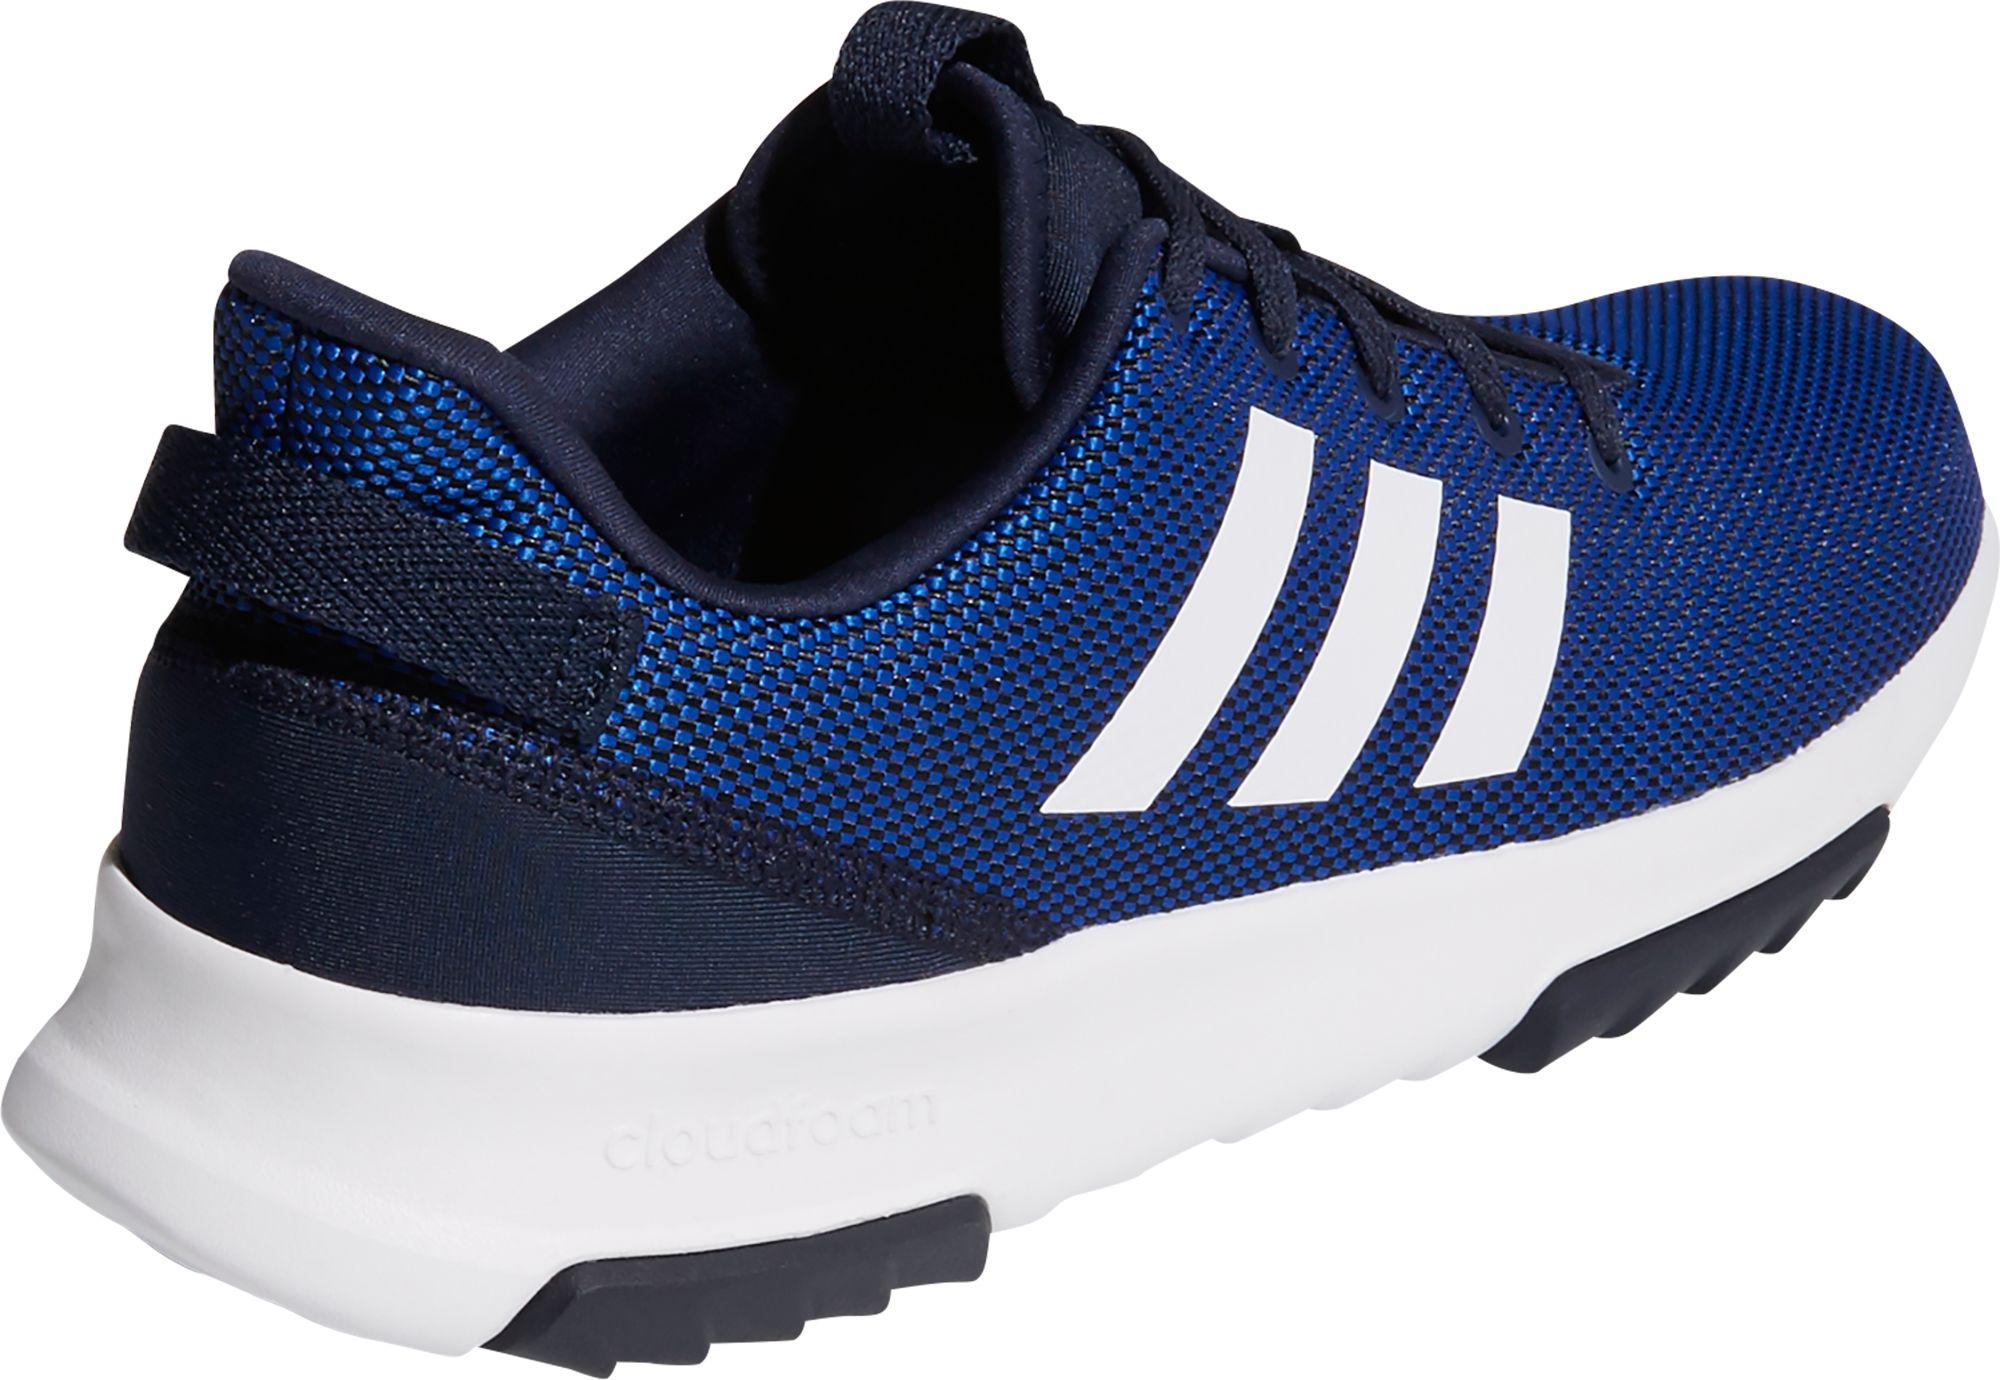 adidas Rubber Cf Racer Tr in Blue/Black (Blue) for Men - Save 45% - Lyst